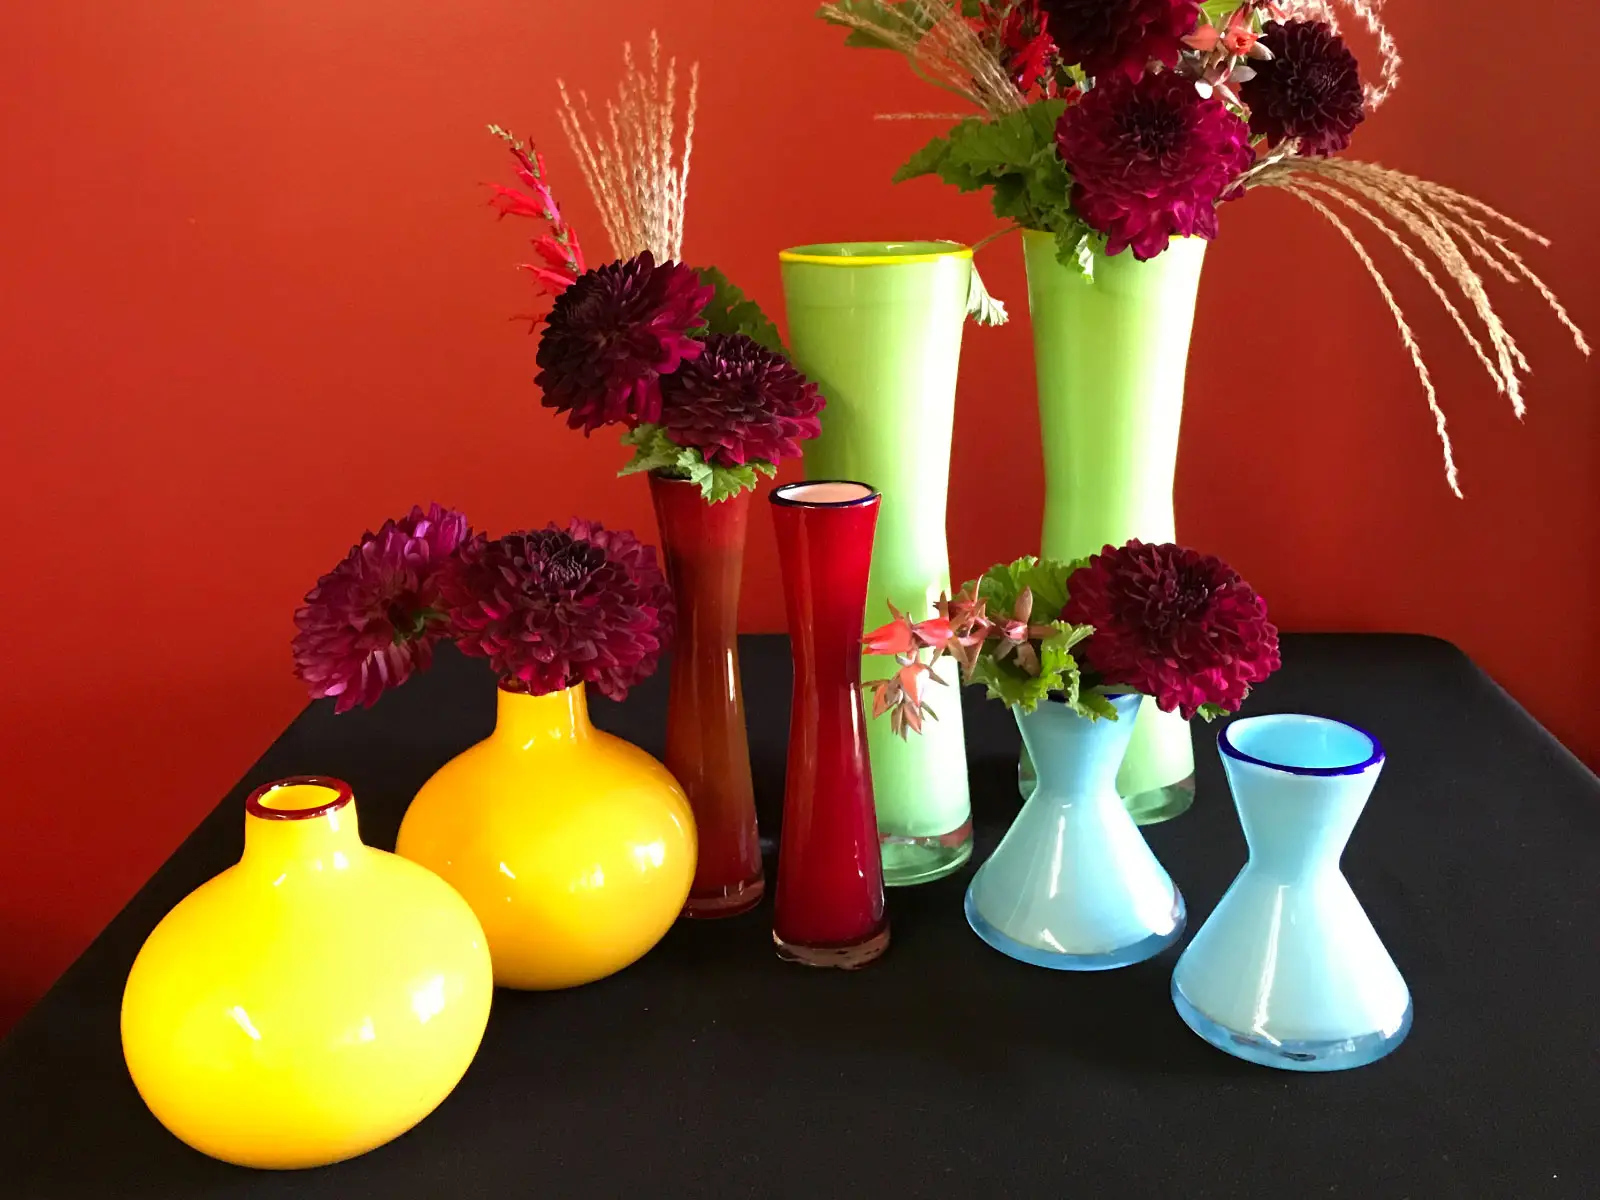 Sets of orange, red, green and blue vases with purple flowers in each one